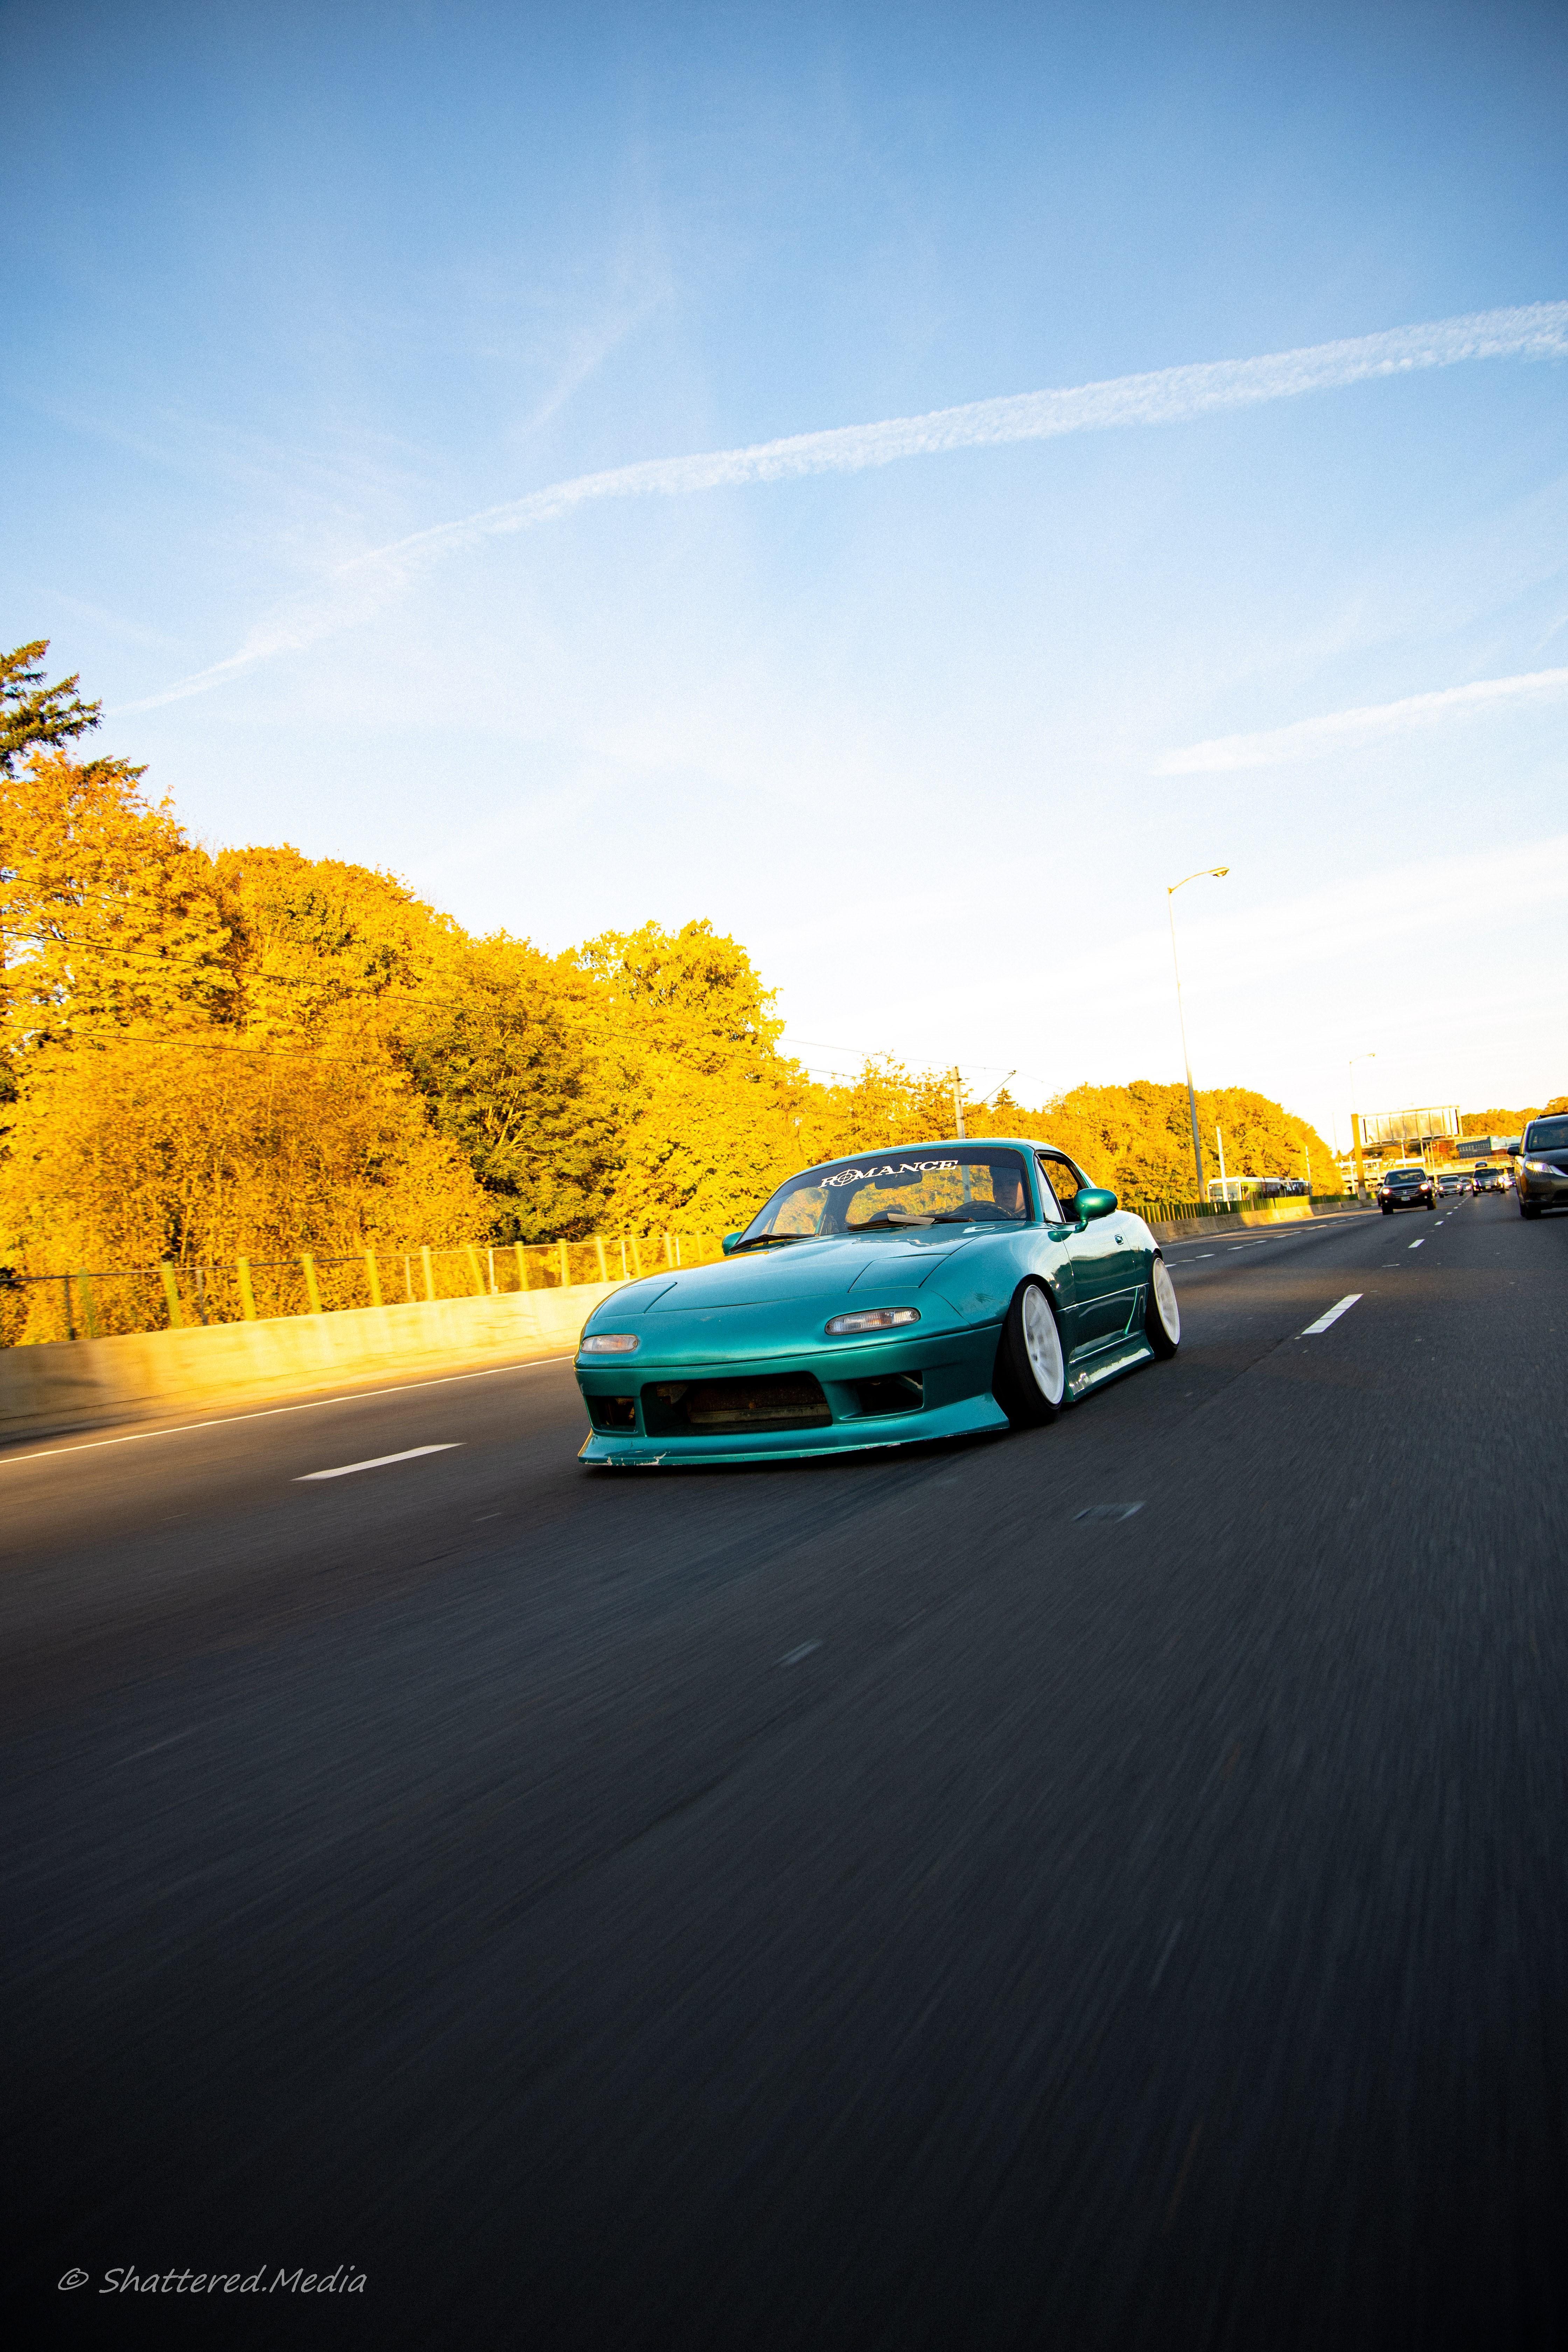 HD wallpaper, Stance Nation, Stanced, Miata, Car Show, Lowered, Low, Car, Mazda Mx 5, Racer, Stance